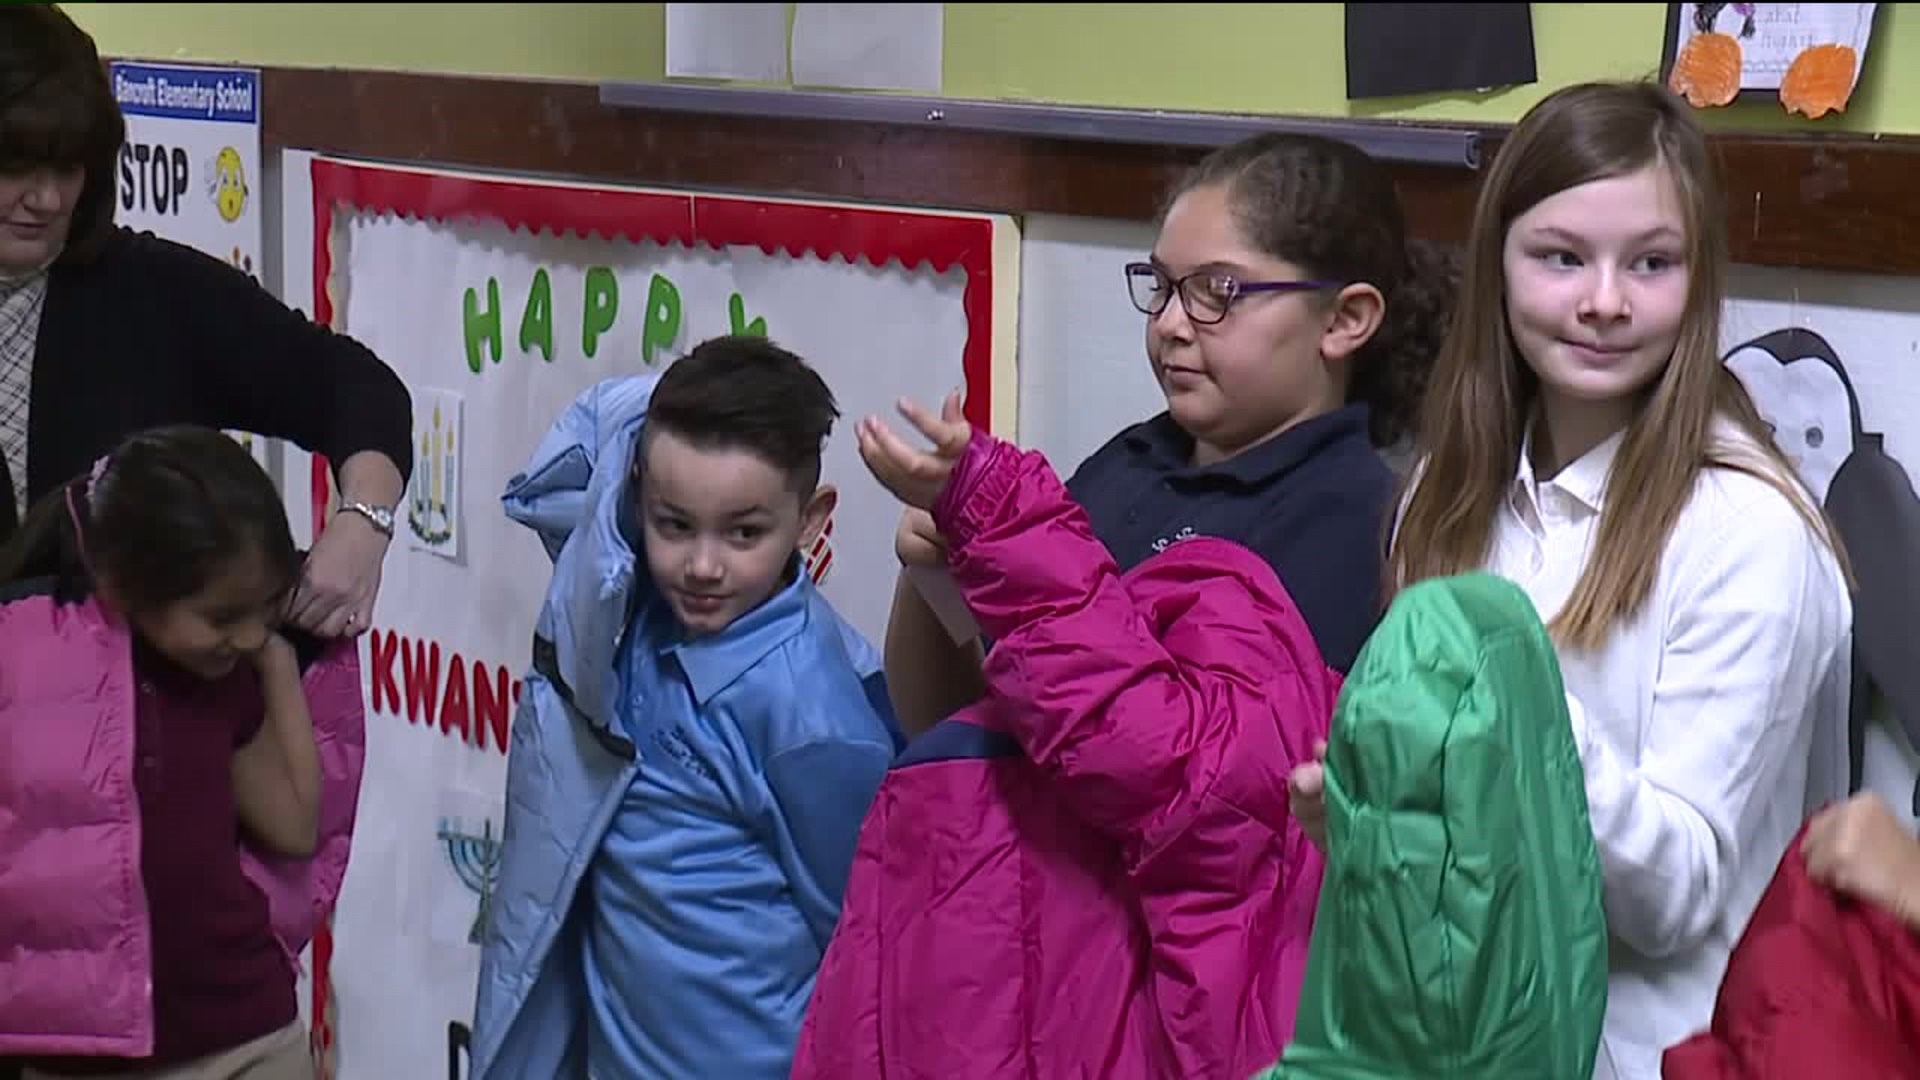 Bundle Up: Church Provides School Children with Warm Holiday